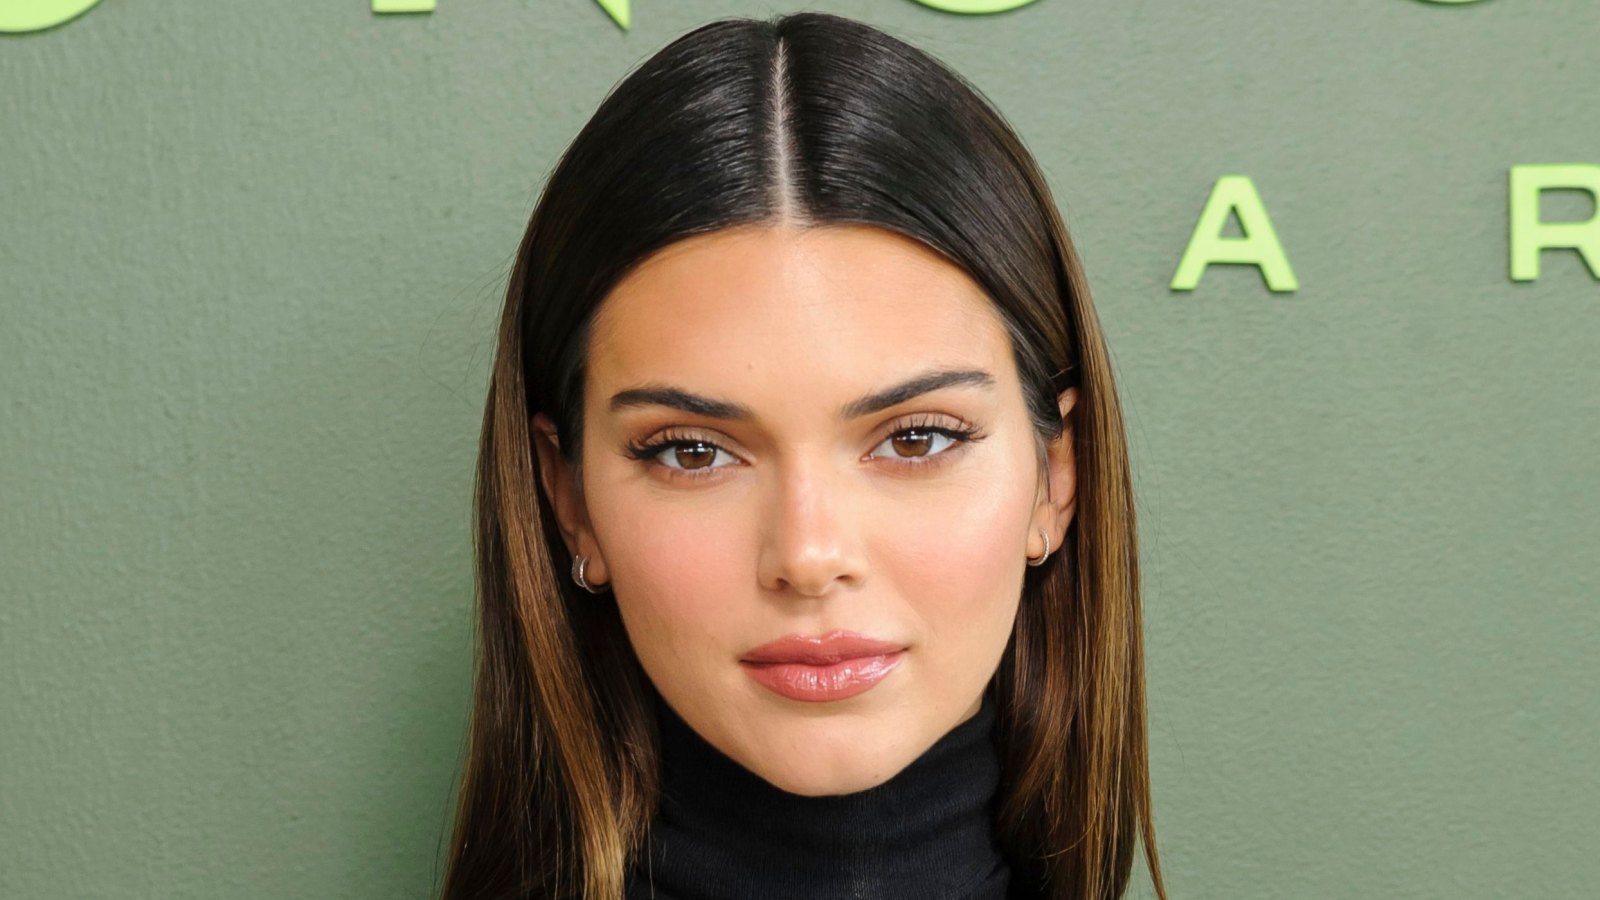 Kendall Jenner Beauty Secret Has Nearly 9,000 Great Reviews | Us Weekly